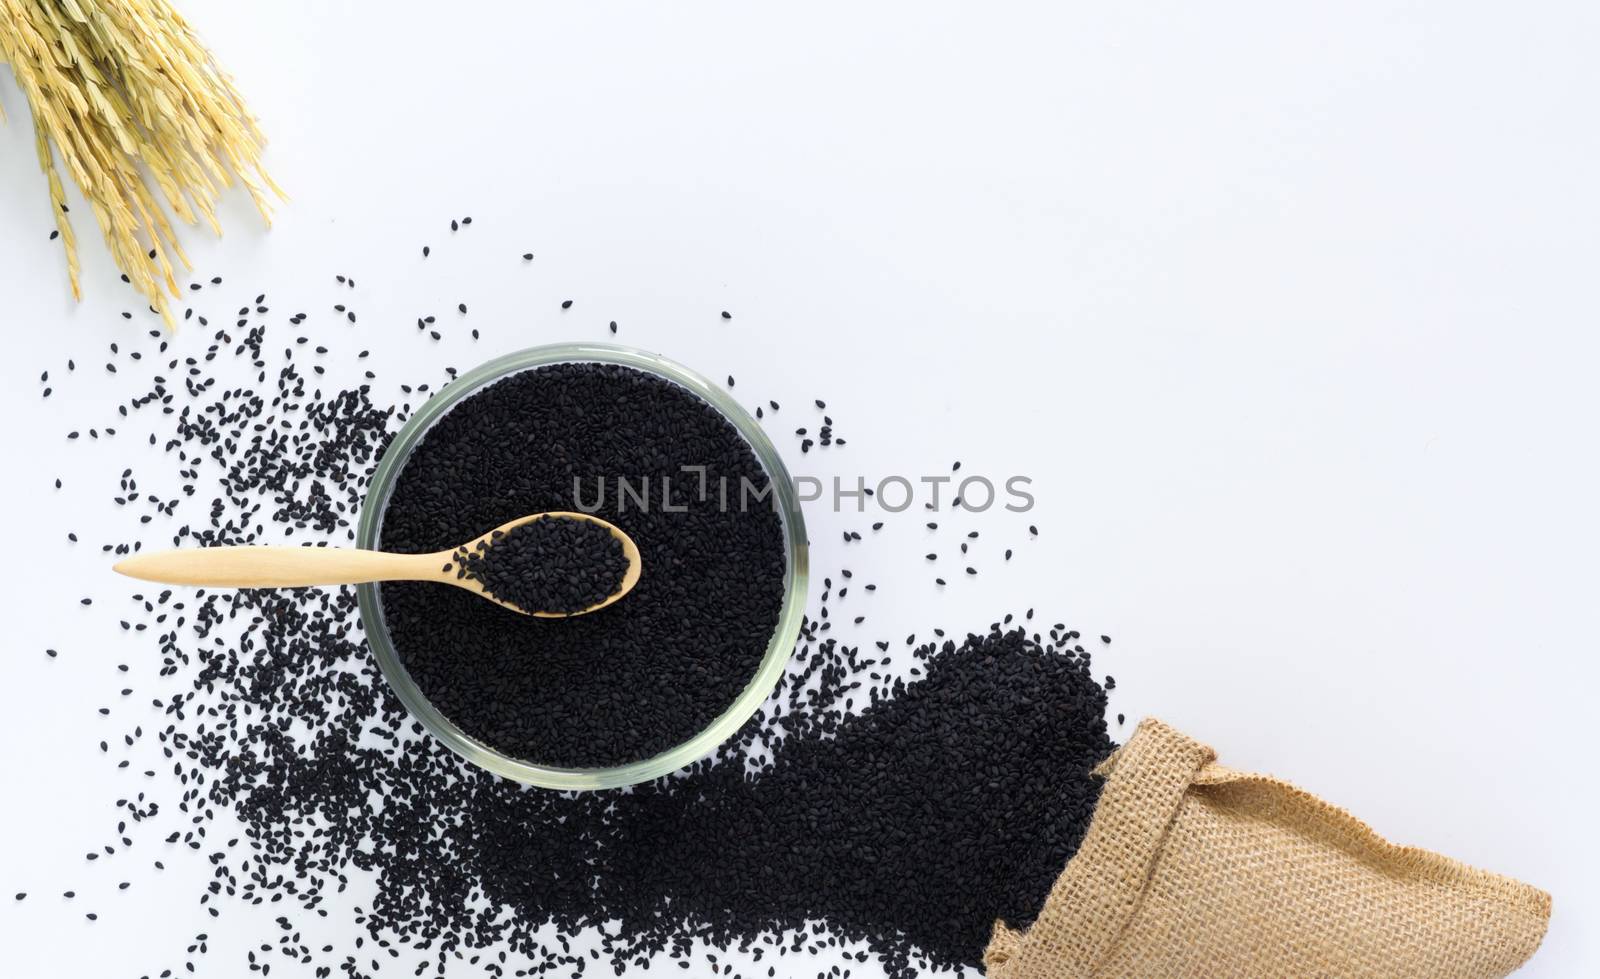 Black sesame in a cup on a white background by hellogiant